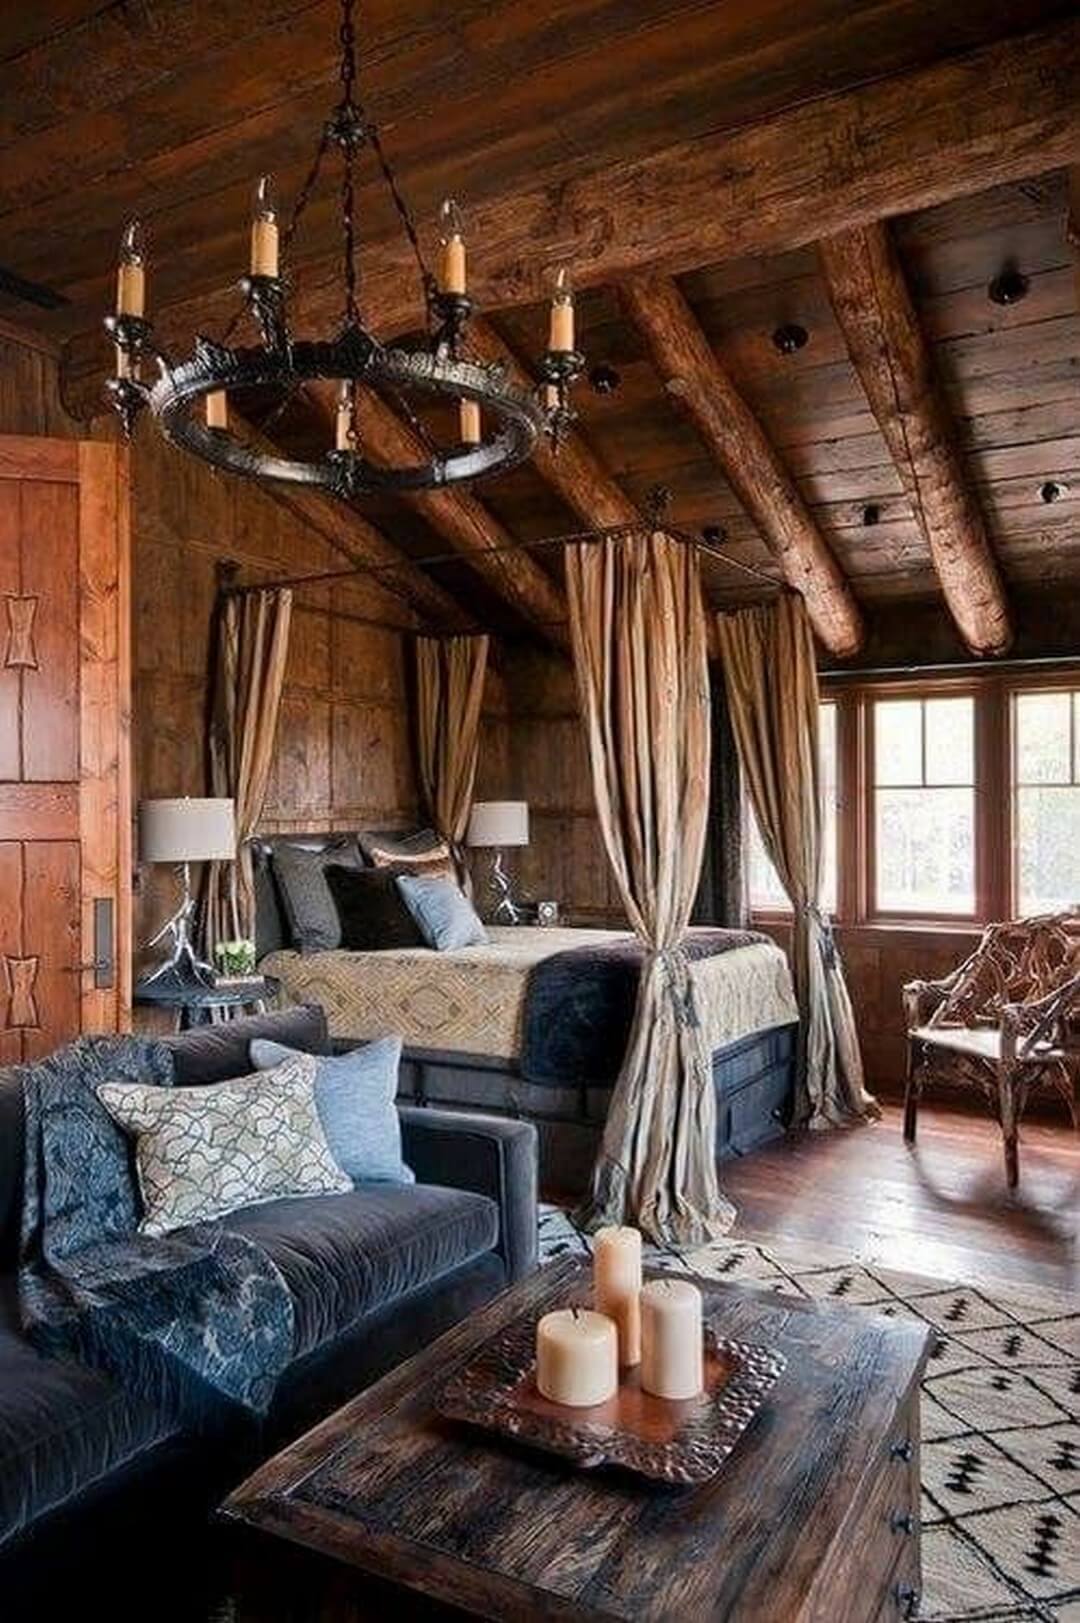 Luxurious country bedroom